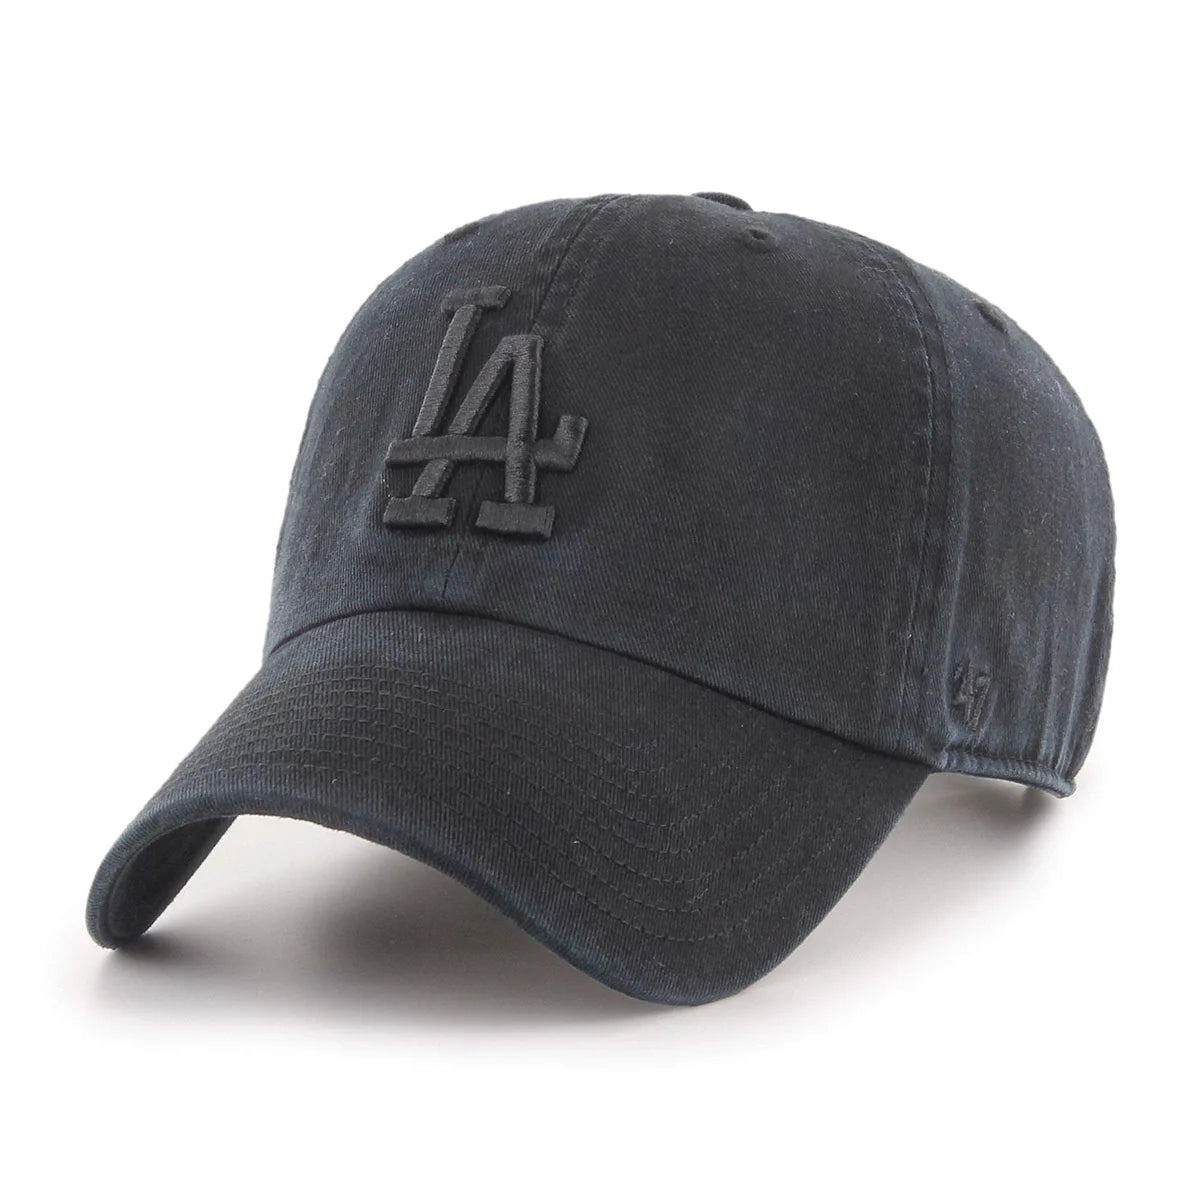 '47 Brand LOS ANGELES DODGERS '47 CLEAN UP